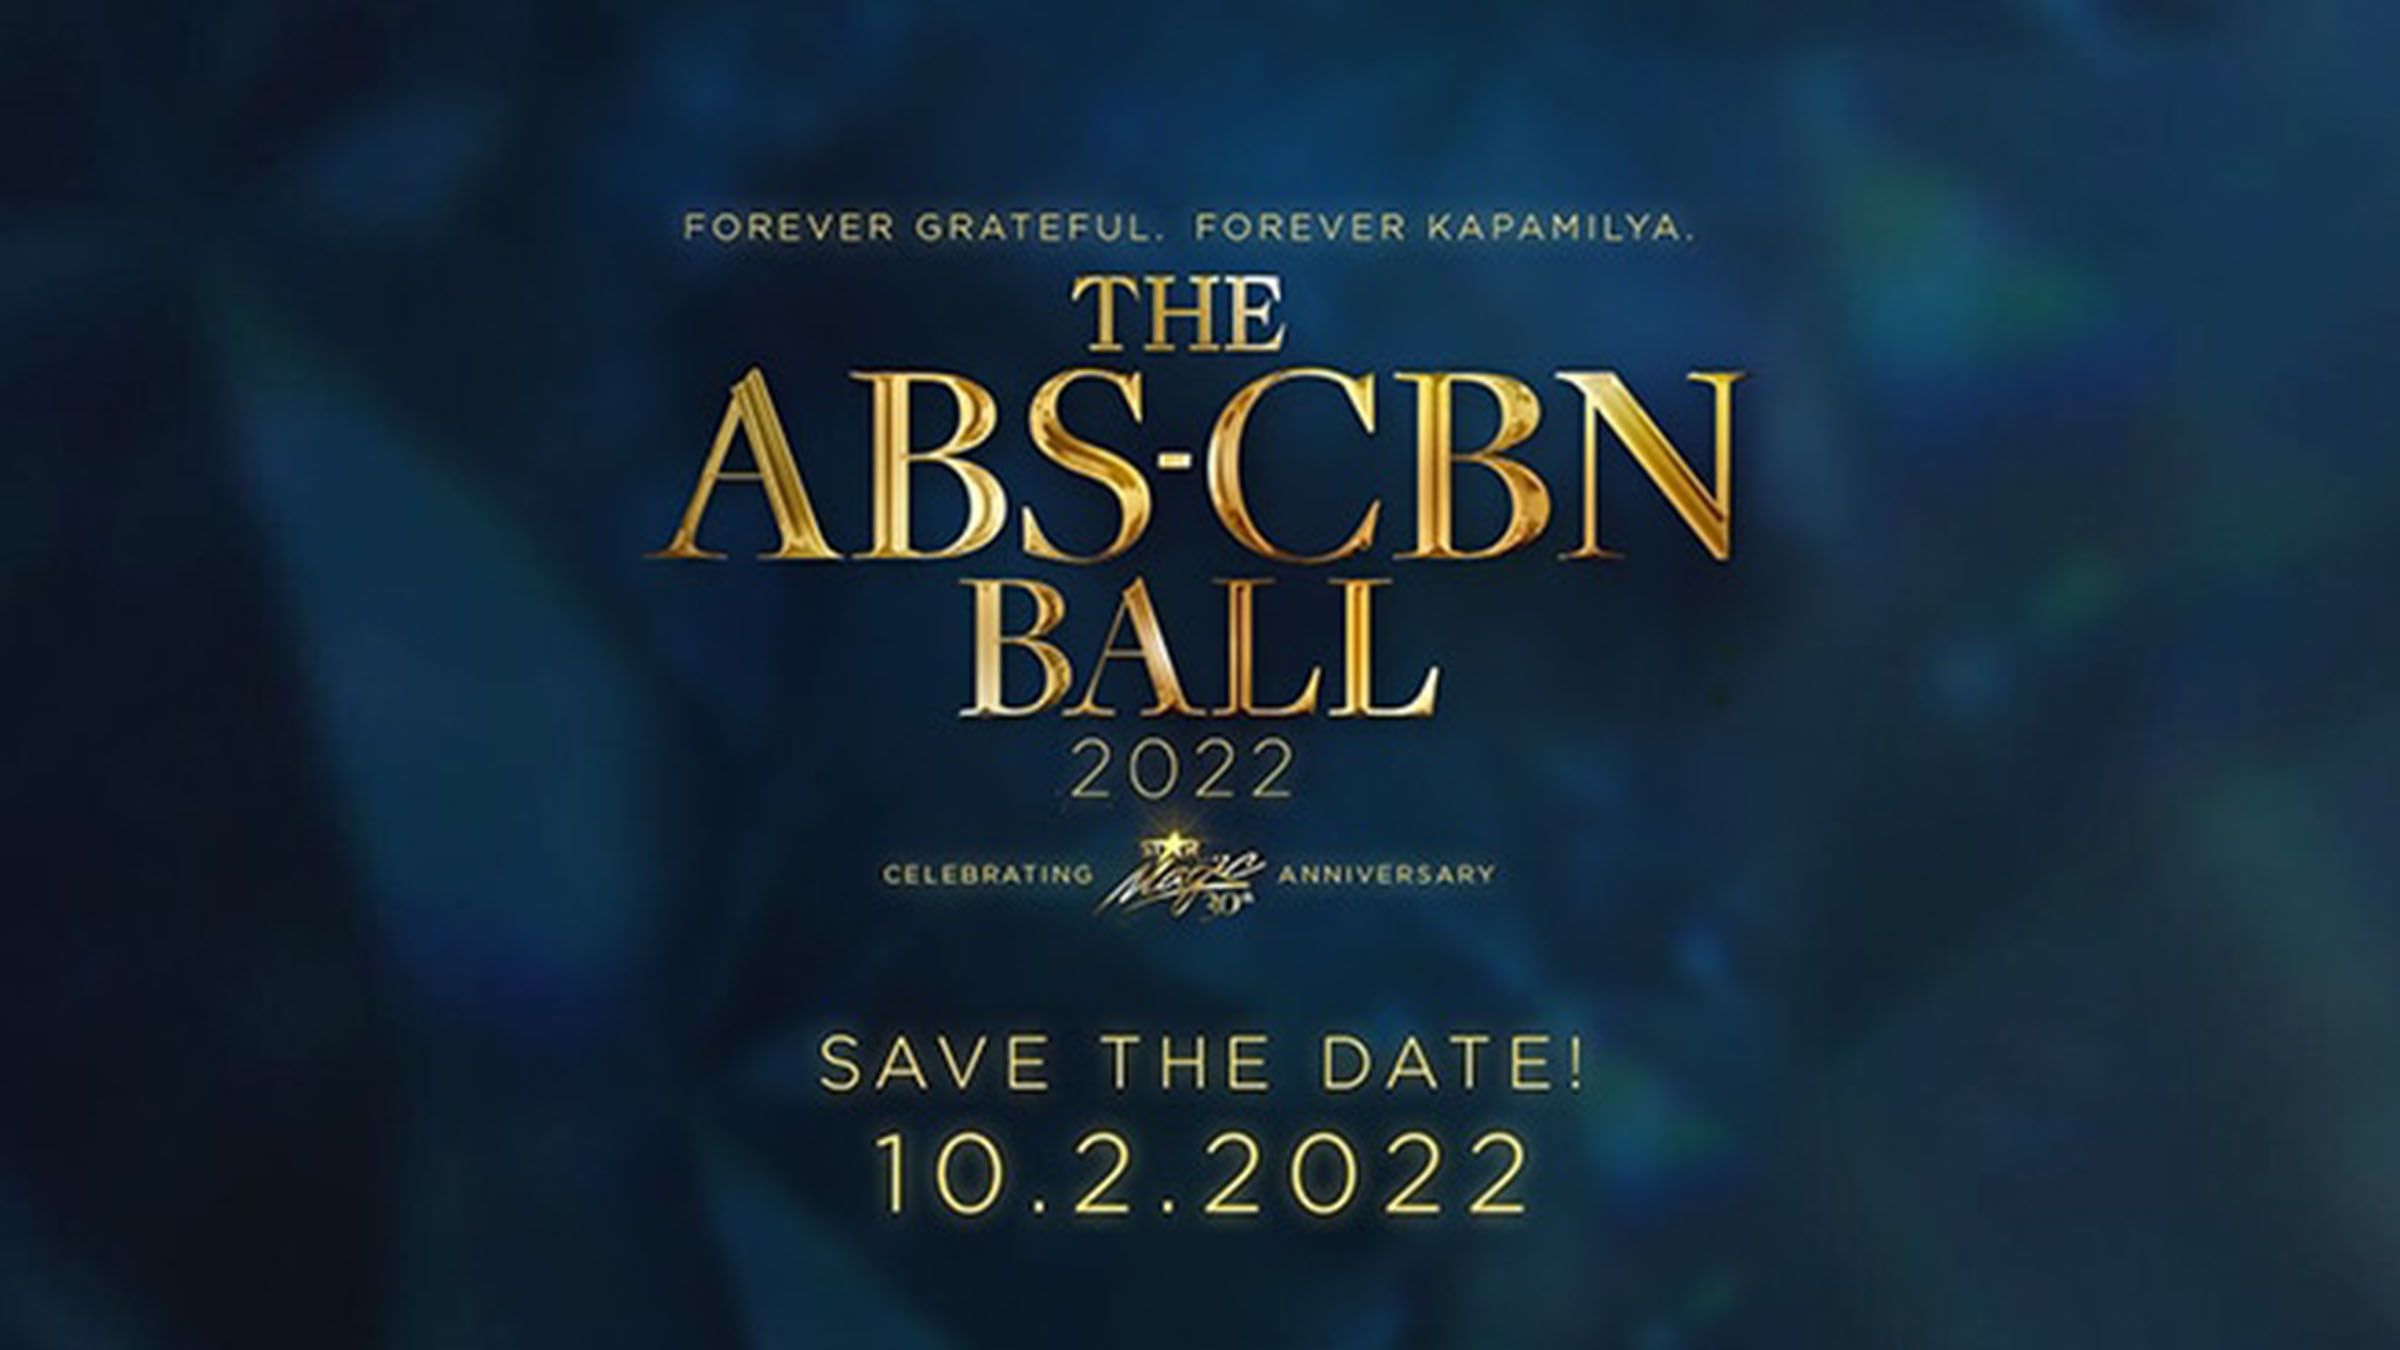 ABS-CBN’s defers first ball slated for October 2